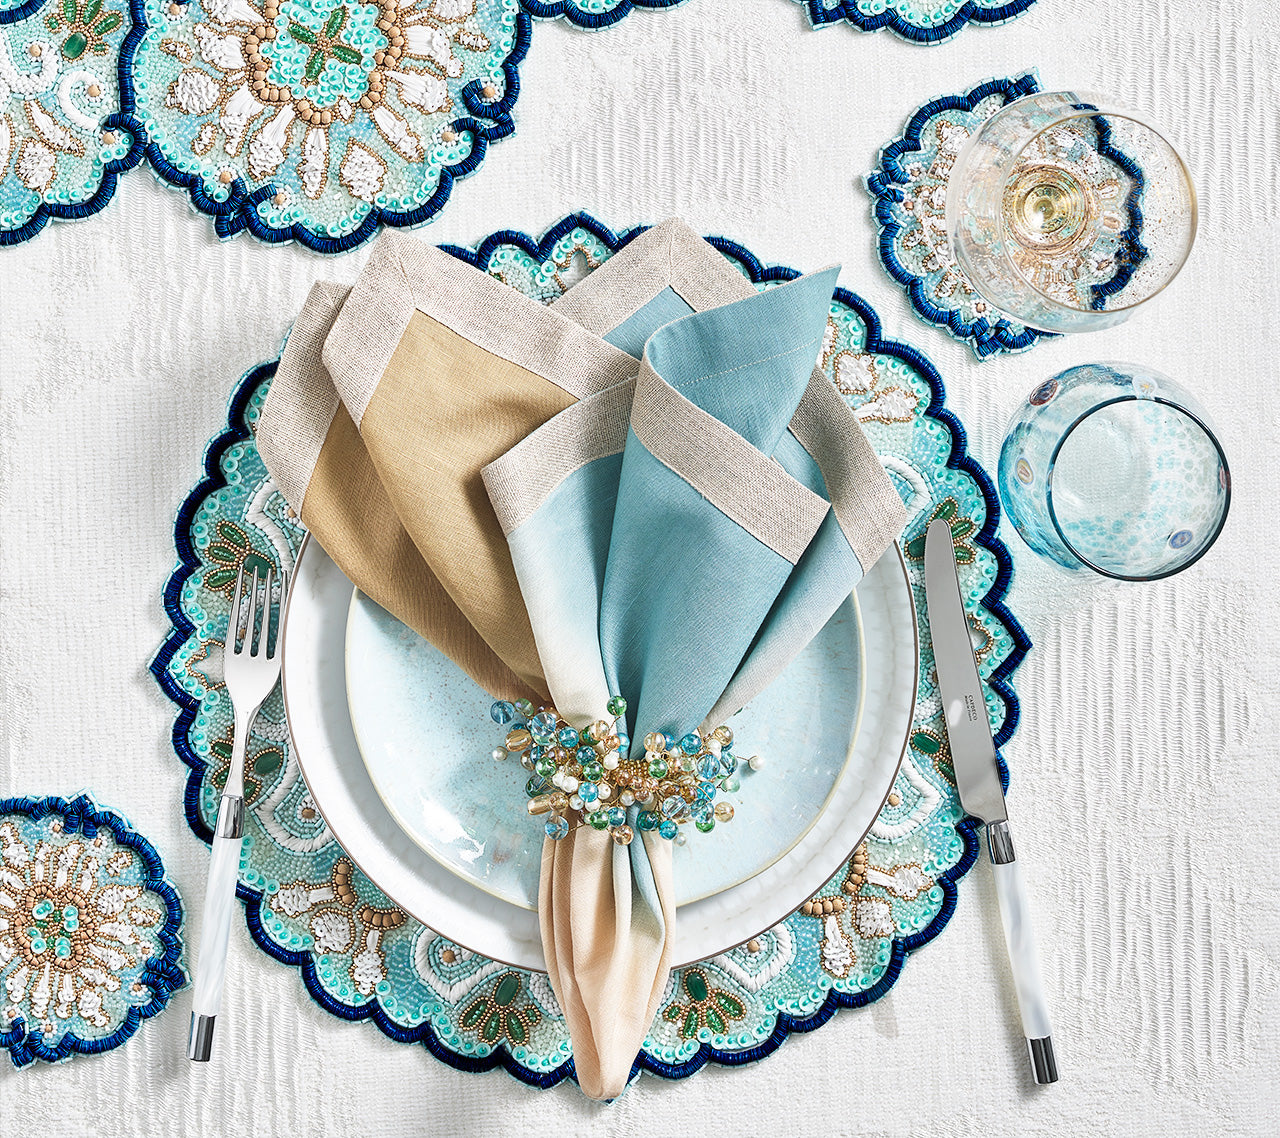 Kim Seybert's luxurious Lisbon Placemat, Table Runner and Drink Coaster Collection